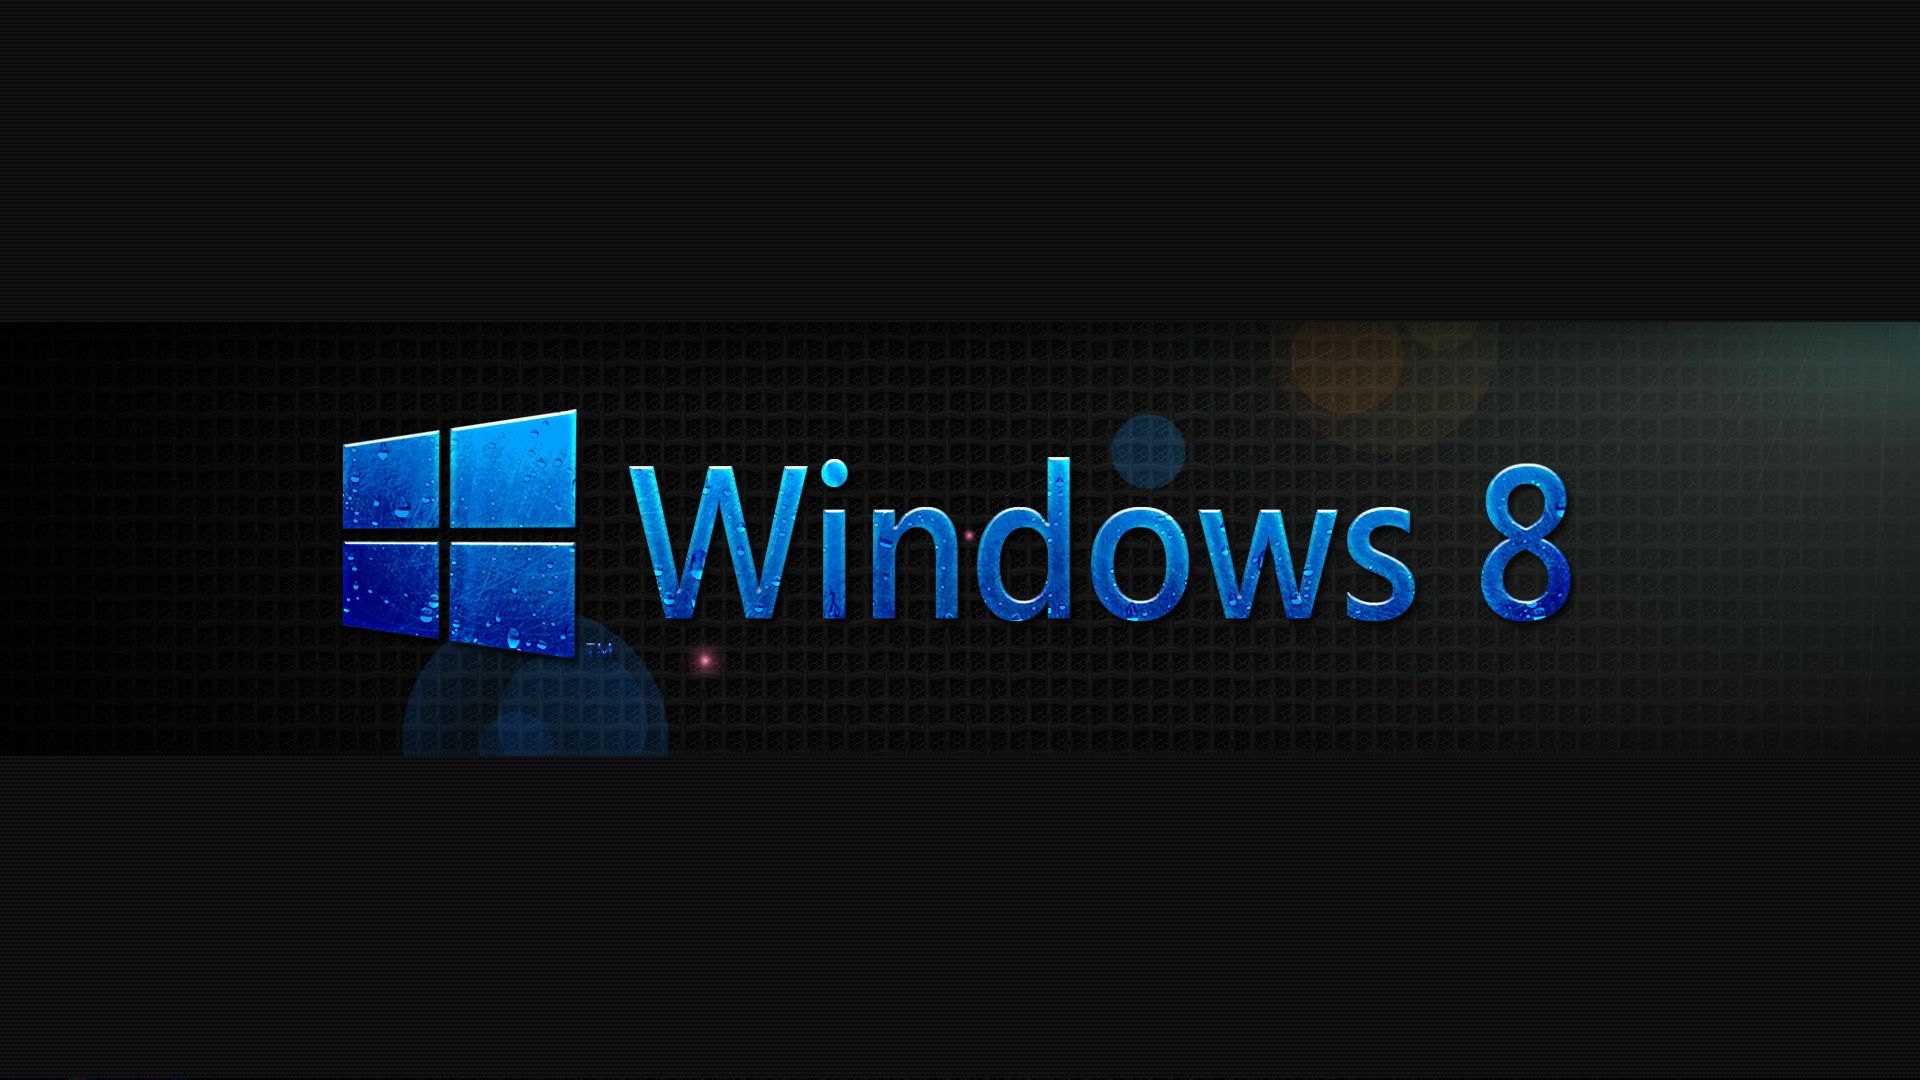 HD Wallpapers For Windows 8 - HD Images New